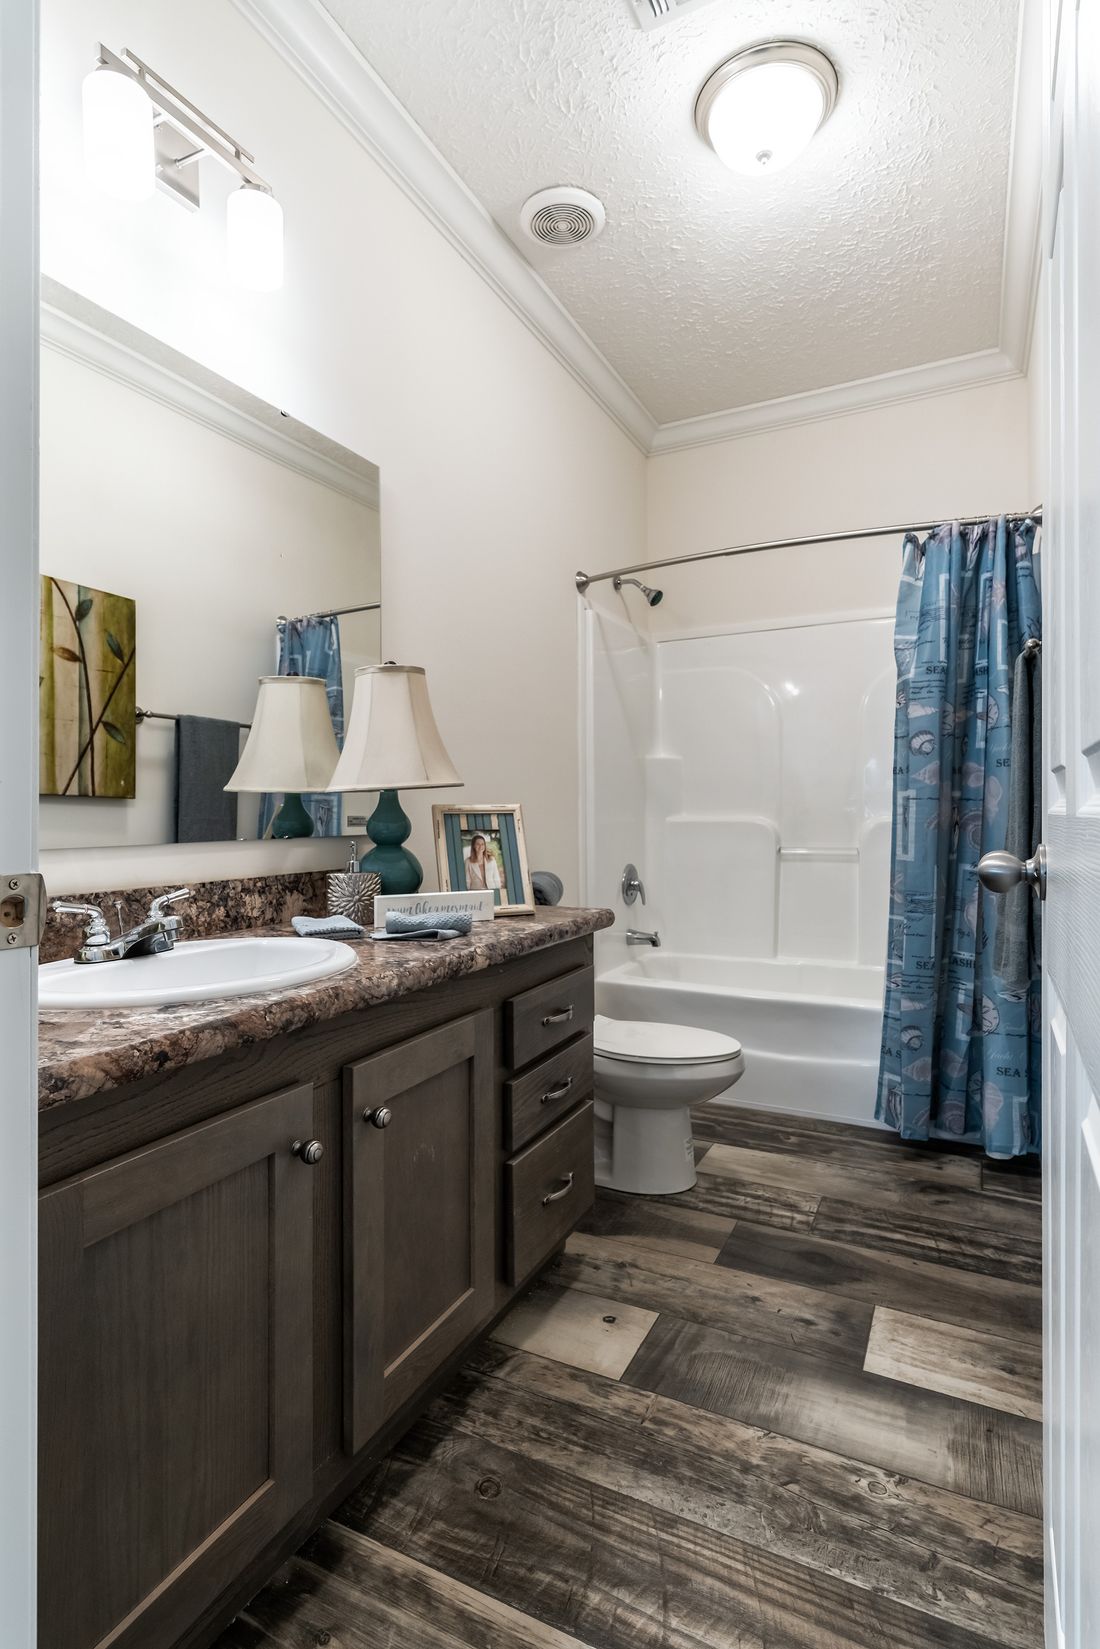 The 3337 64X28 CK4+2 FREEDOM MOD Guest Bathroom. This Modular Home features 4 bedrooms and 2 baths.